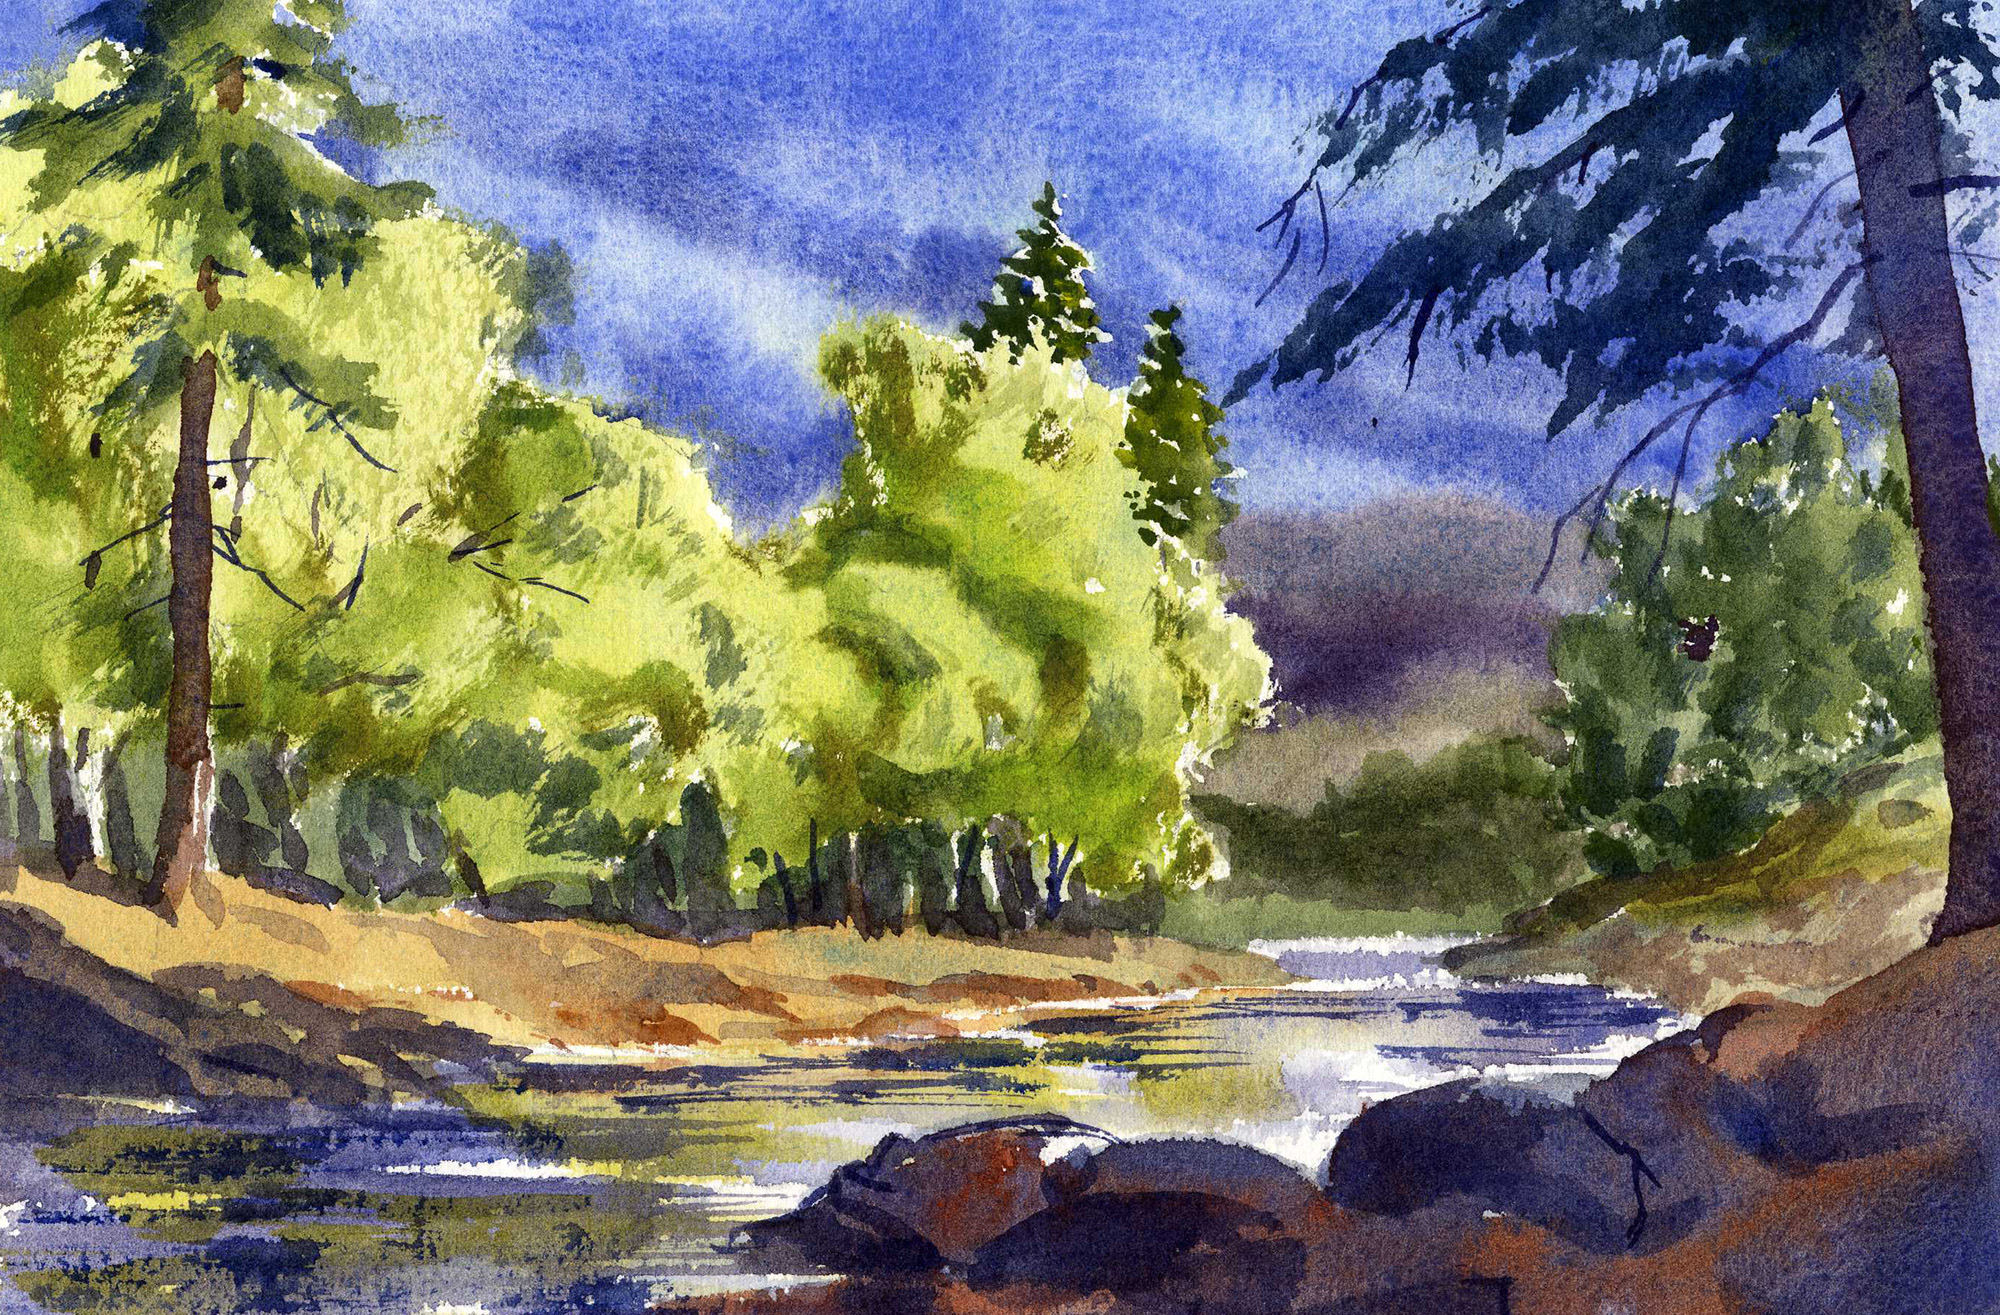 Paint a summer scene with sparkling water in this watercolor painting lesson.